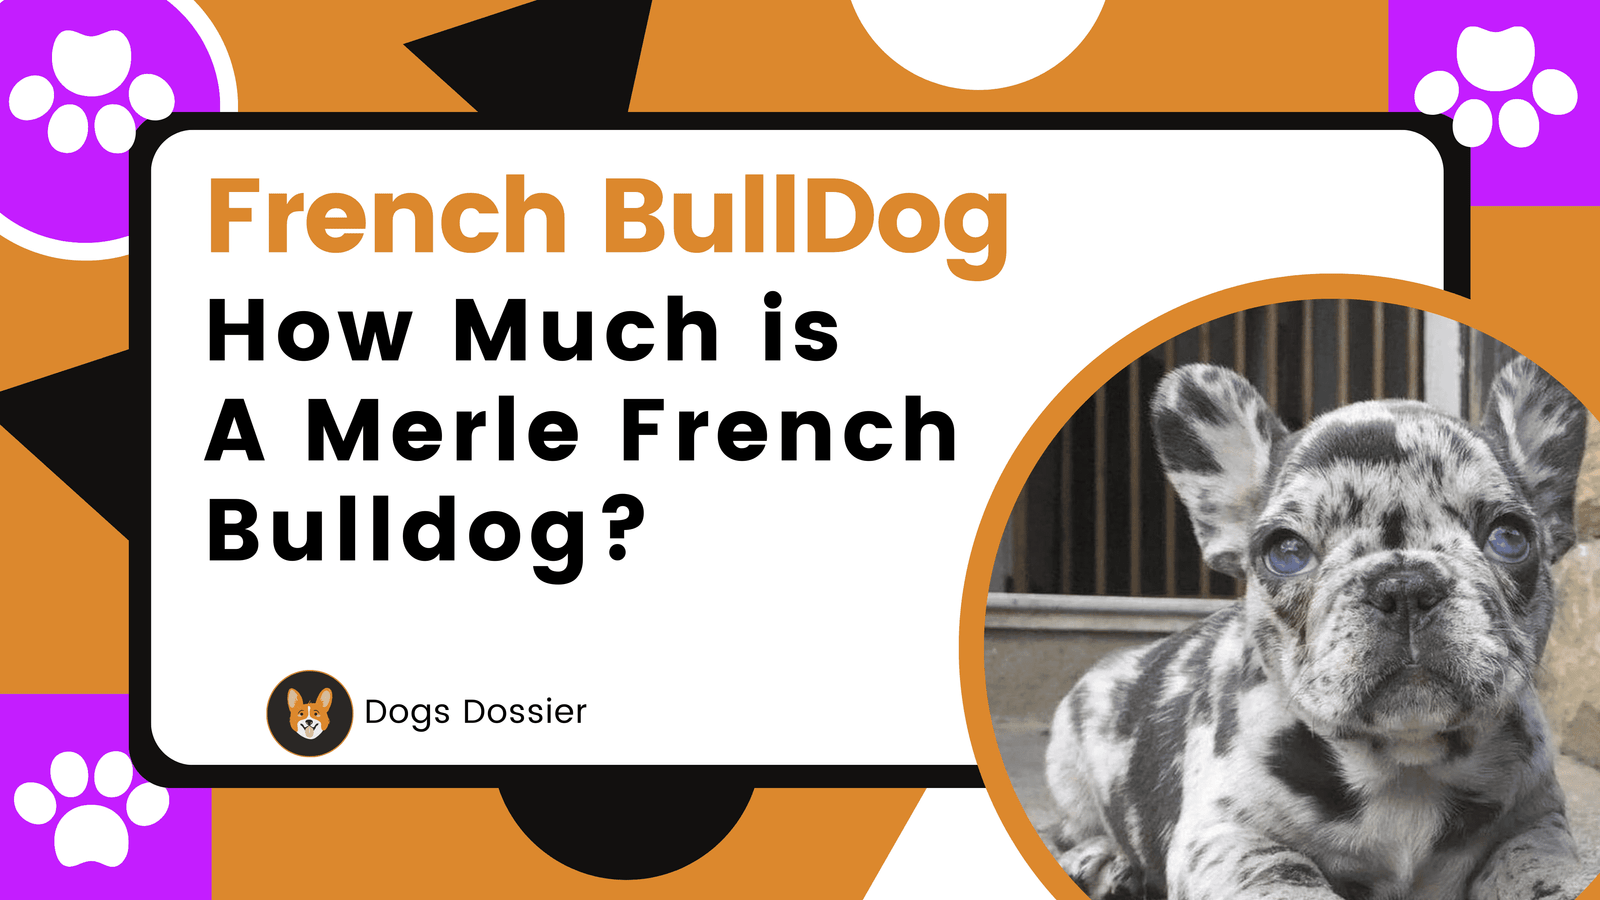 How Much is a Merle French Bulldog?